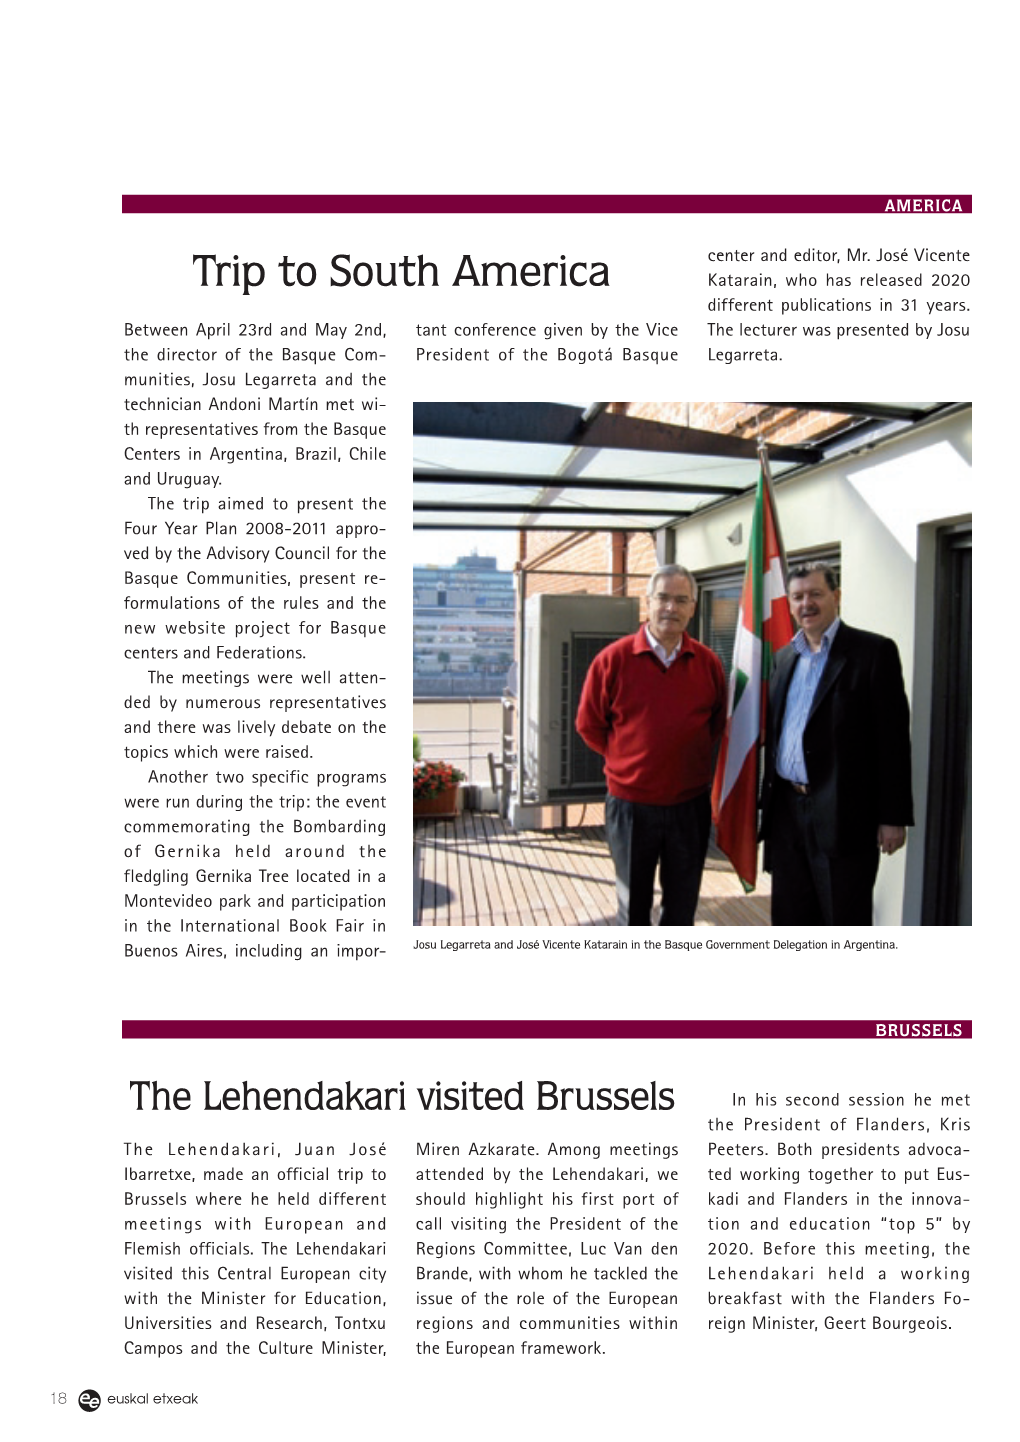 Trip to South America Katarain, Who Has Released 2020 Different Publications in 31 Years